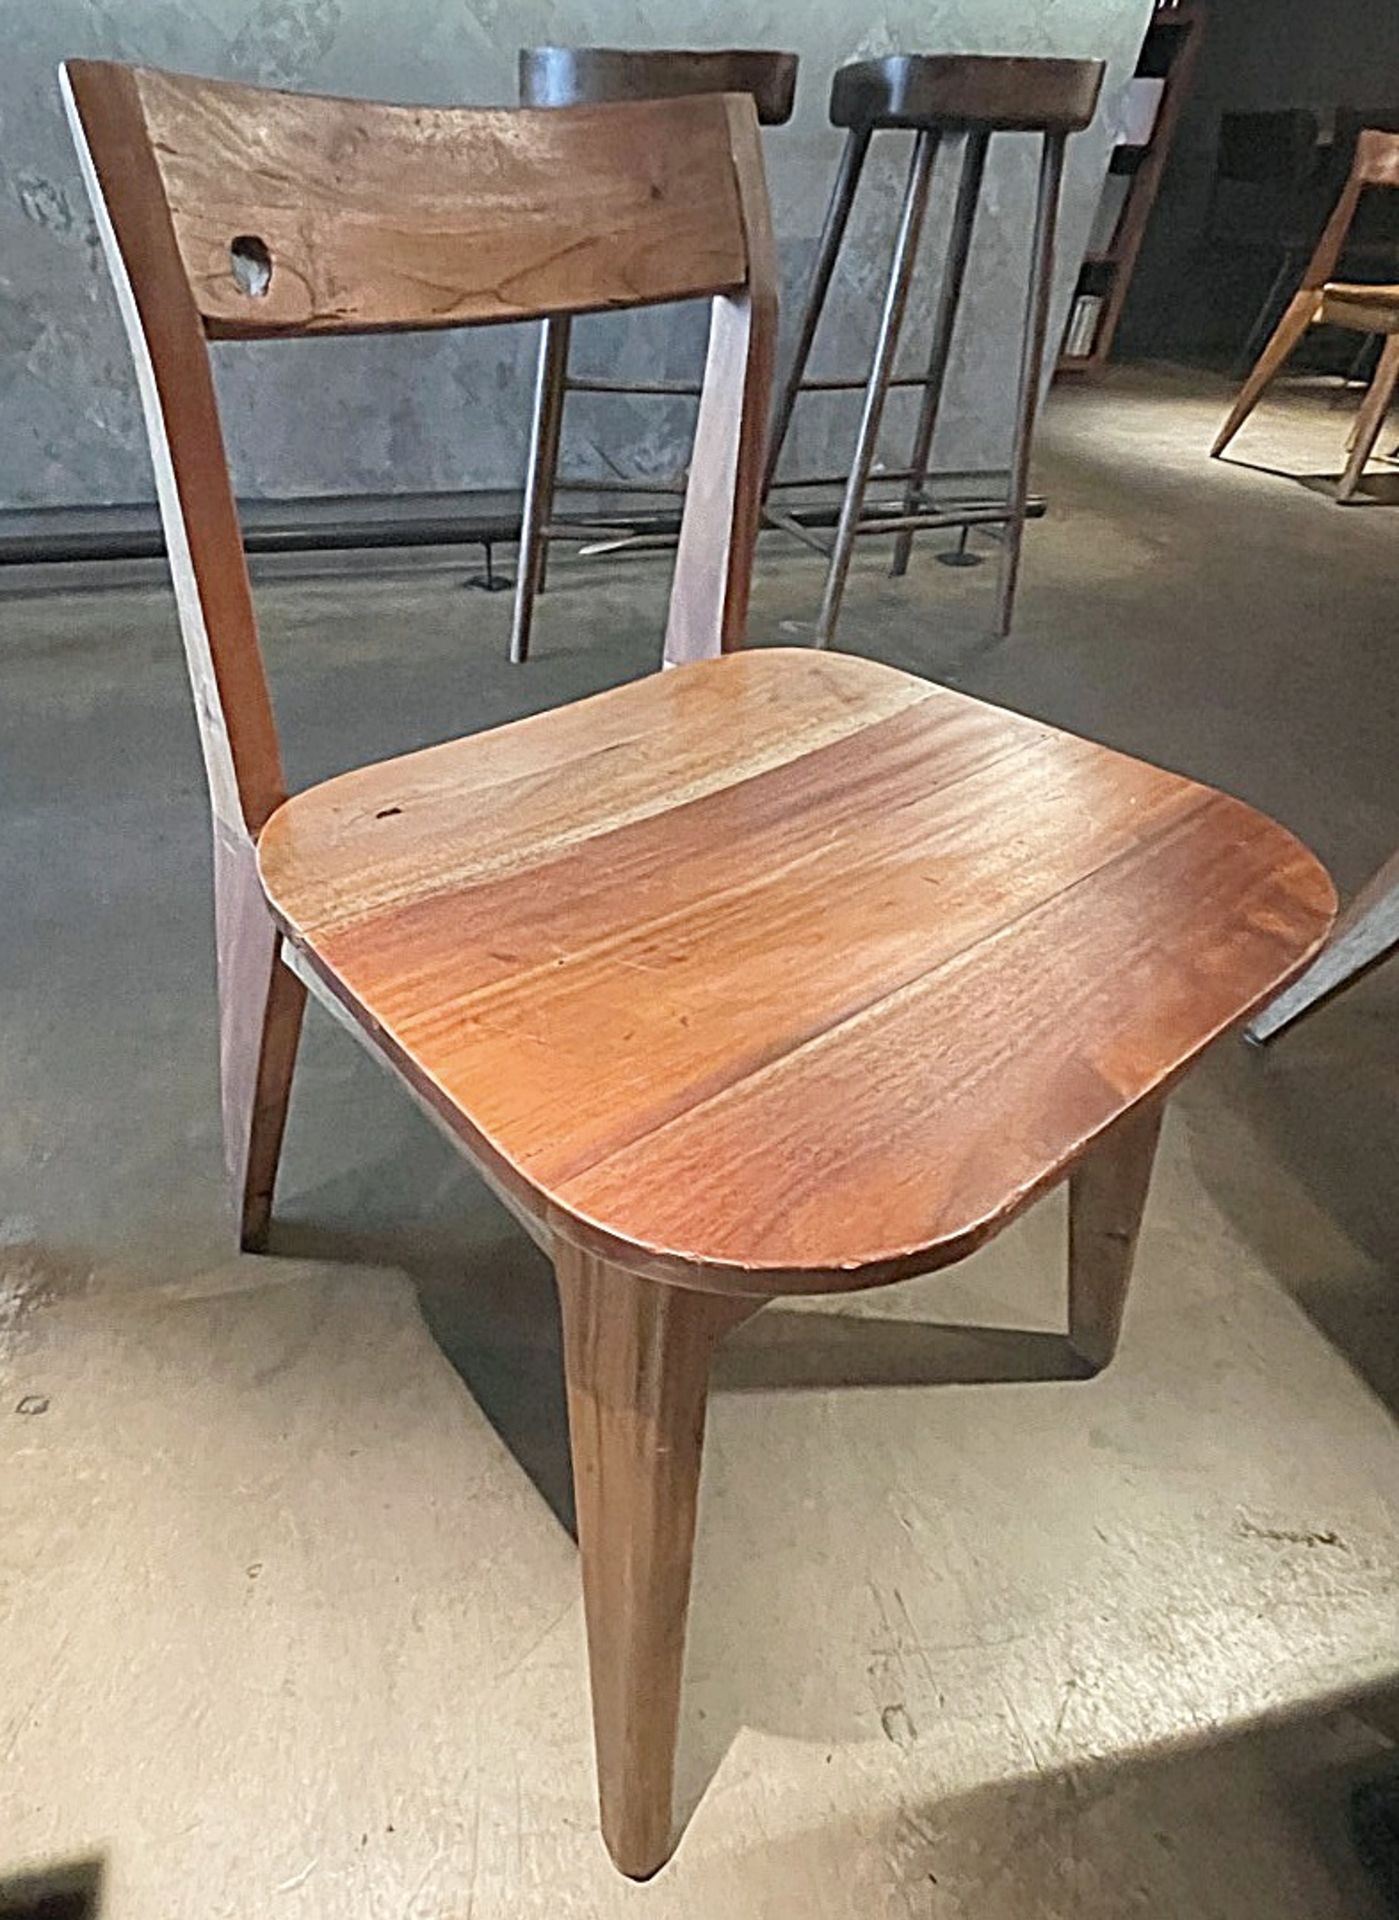 12 x Solid Wood Bistro Bar Dining Chairs - Ref: MAN141 - CL677 - Location: London W1F - Image 13 of 14